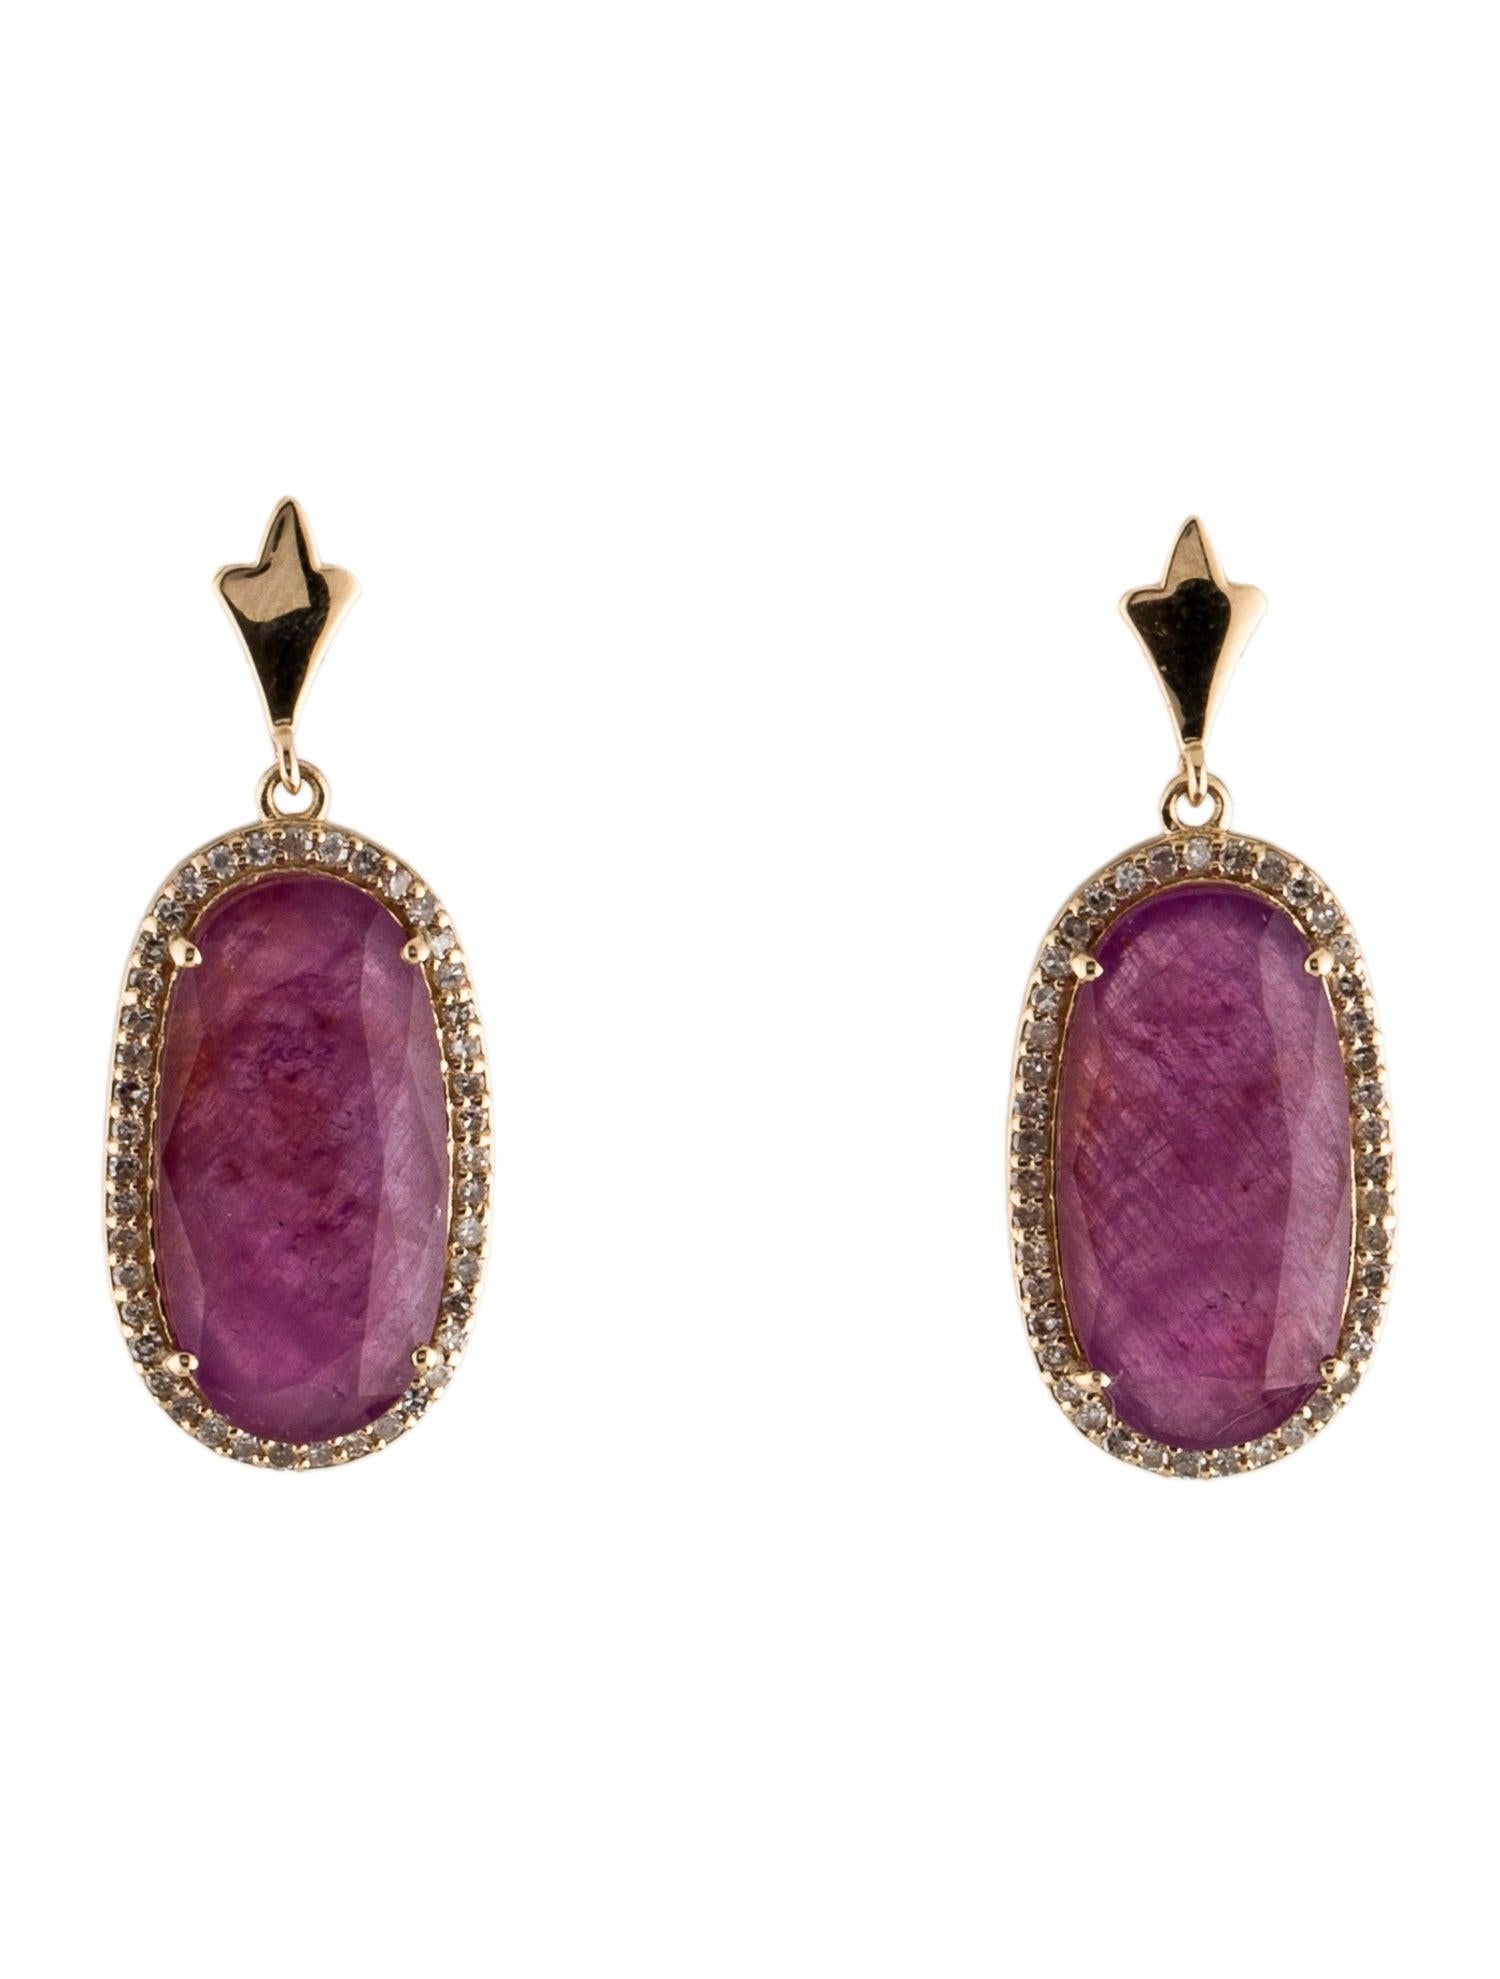 14K Ruby & Diamond Drop Earrings - 10.14ctw, Elegant & Timeless Gemstone Jewelry In New Condition For Sale In Holtsville, NY